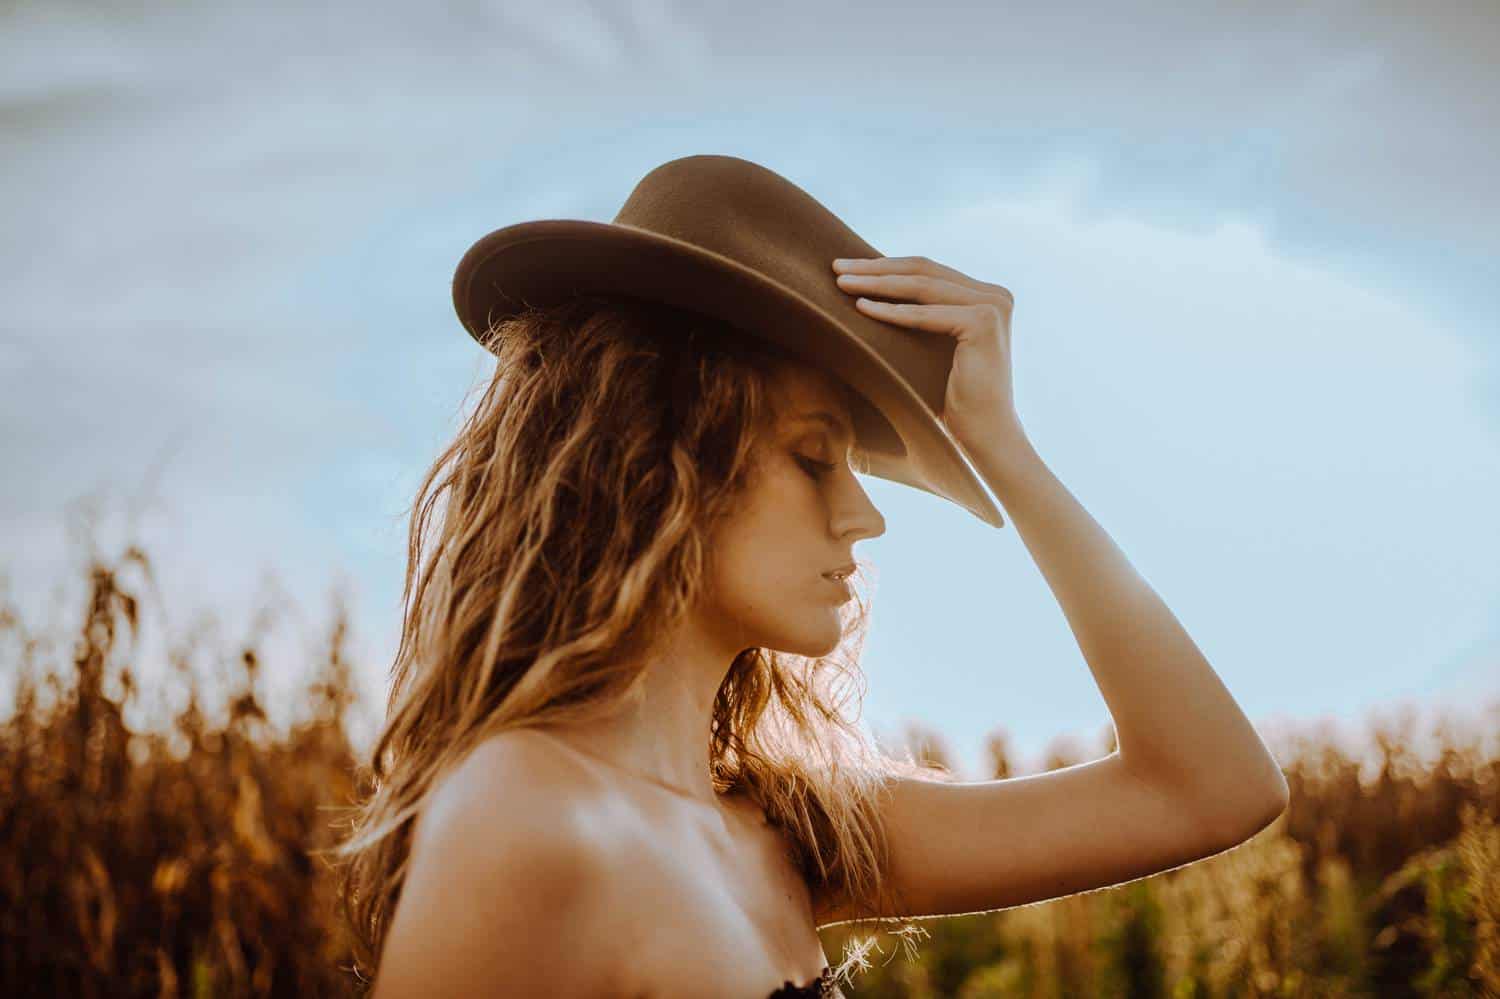 A woman with bare shoulders and blonde hair stands with her profile to the camera, adjusting her felt cowboy hat in the middle of a field.